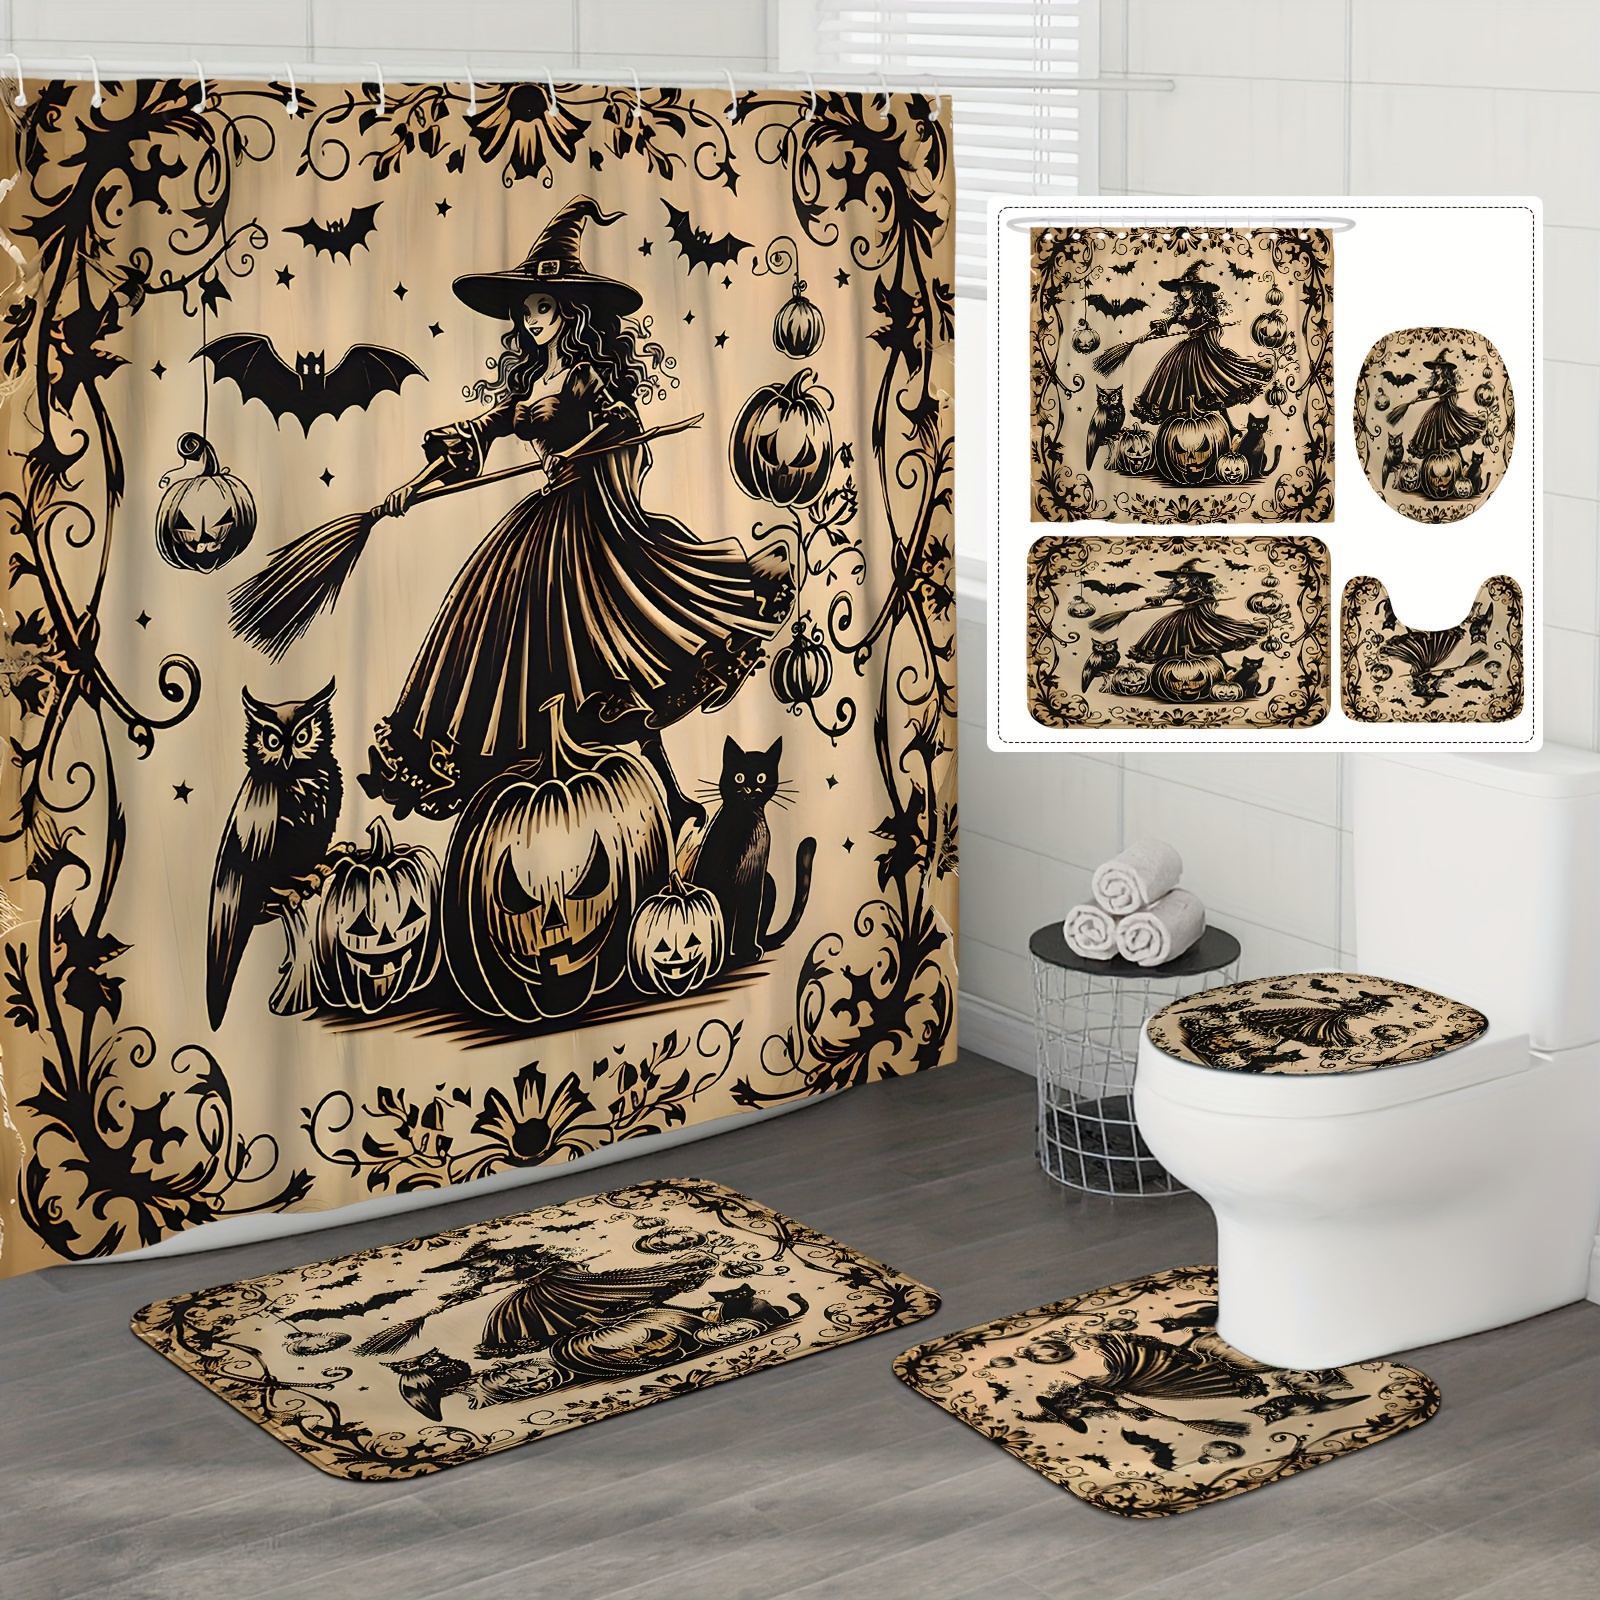 

Halloween Shower Curtain Set With Bath Mat, U-shape Toilet Mat And Lid Cover - Vintage Witch & Pumpkin Design, Water-resistant Polyester, Horror Themed Bathroom Decor With 12 Hooks, Machine Washable